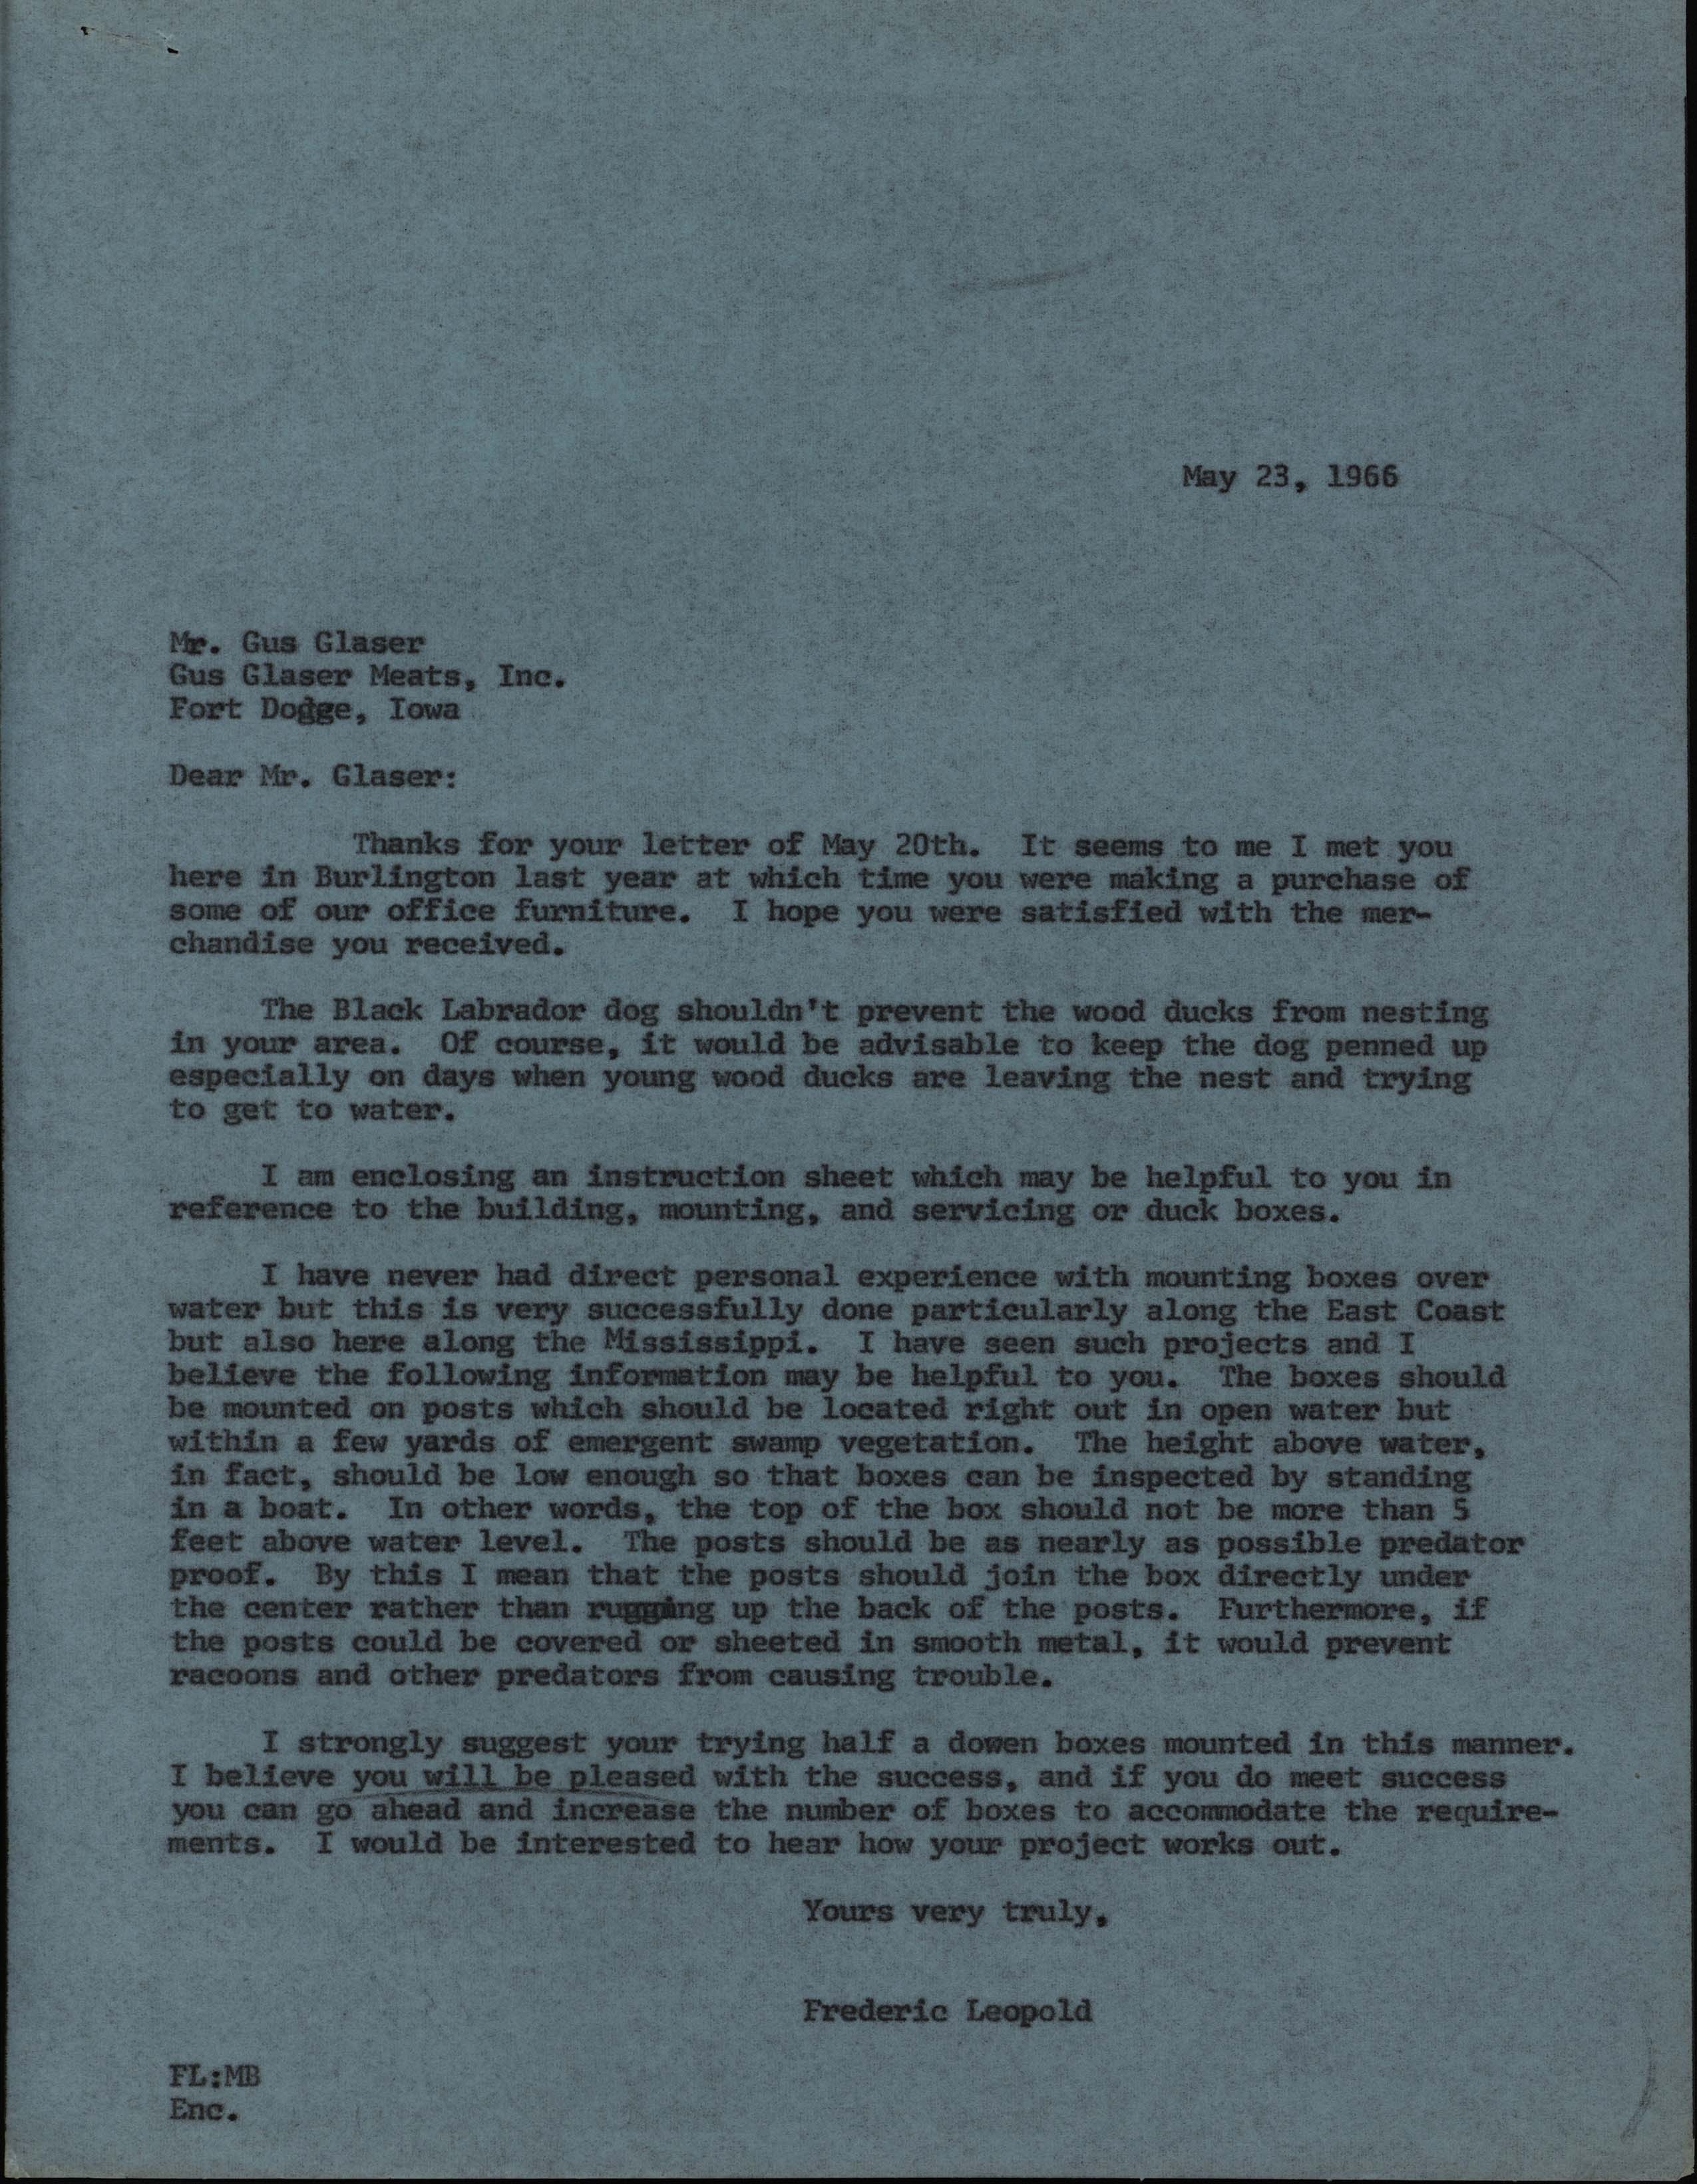 Frederic Leopold letter to Gus Glaser regarding Wood Duck houses, May 23, 1966